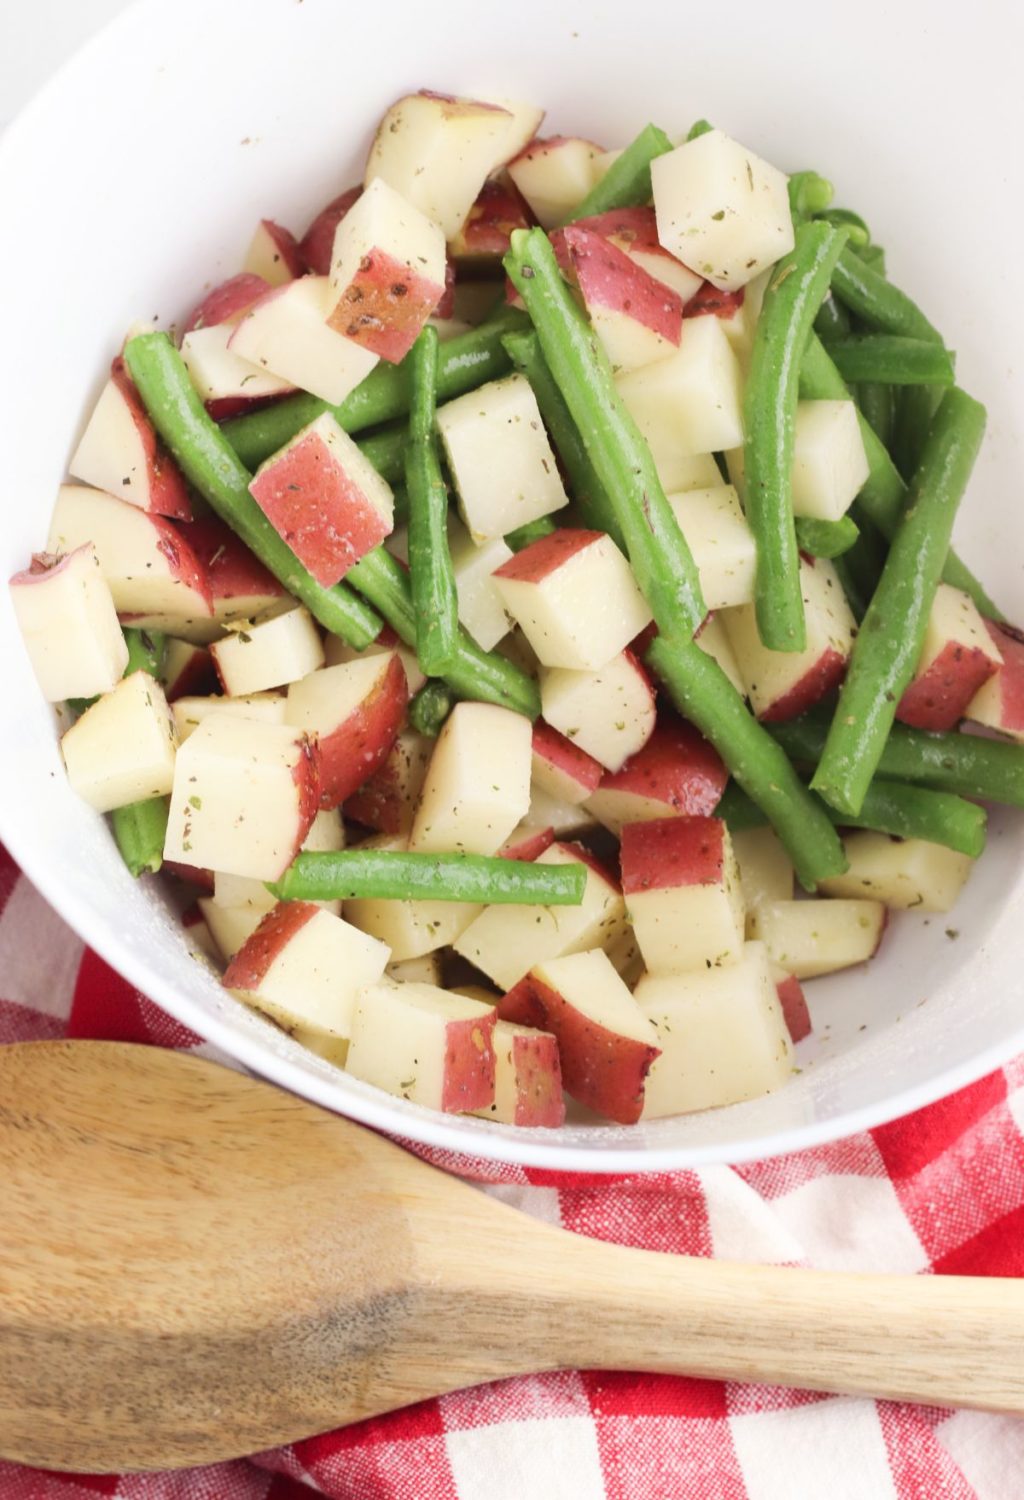 Potatoes and green beans in a white bowl with a wooden spoon.